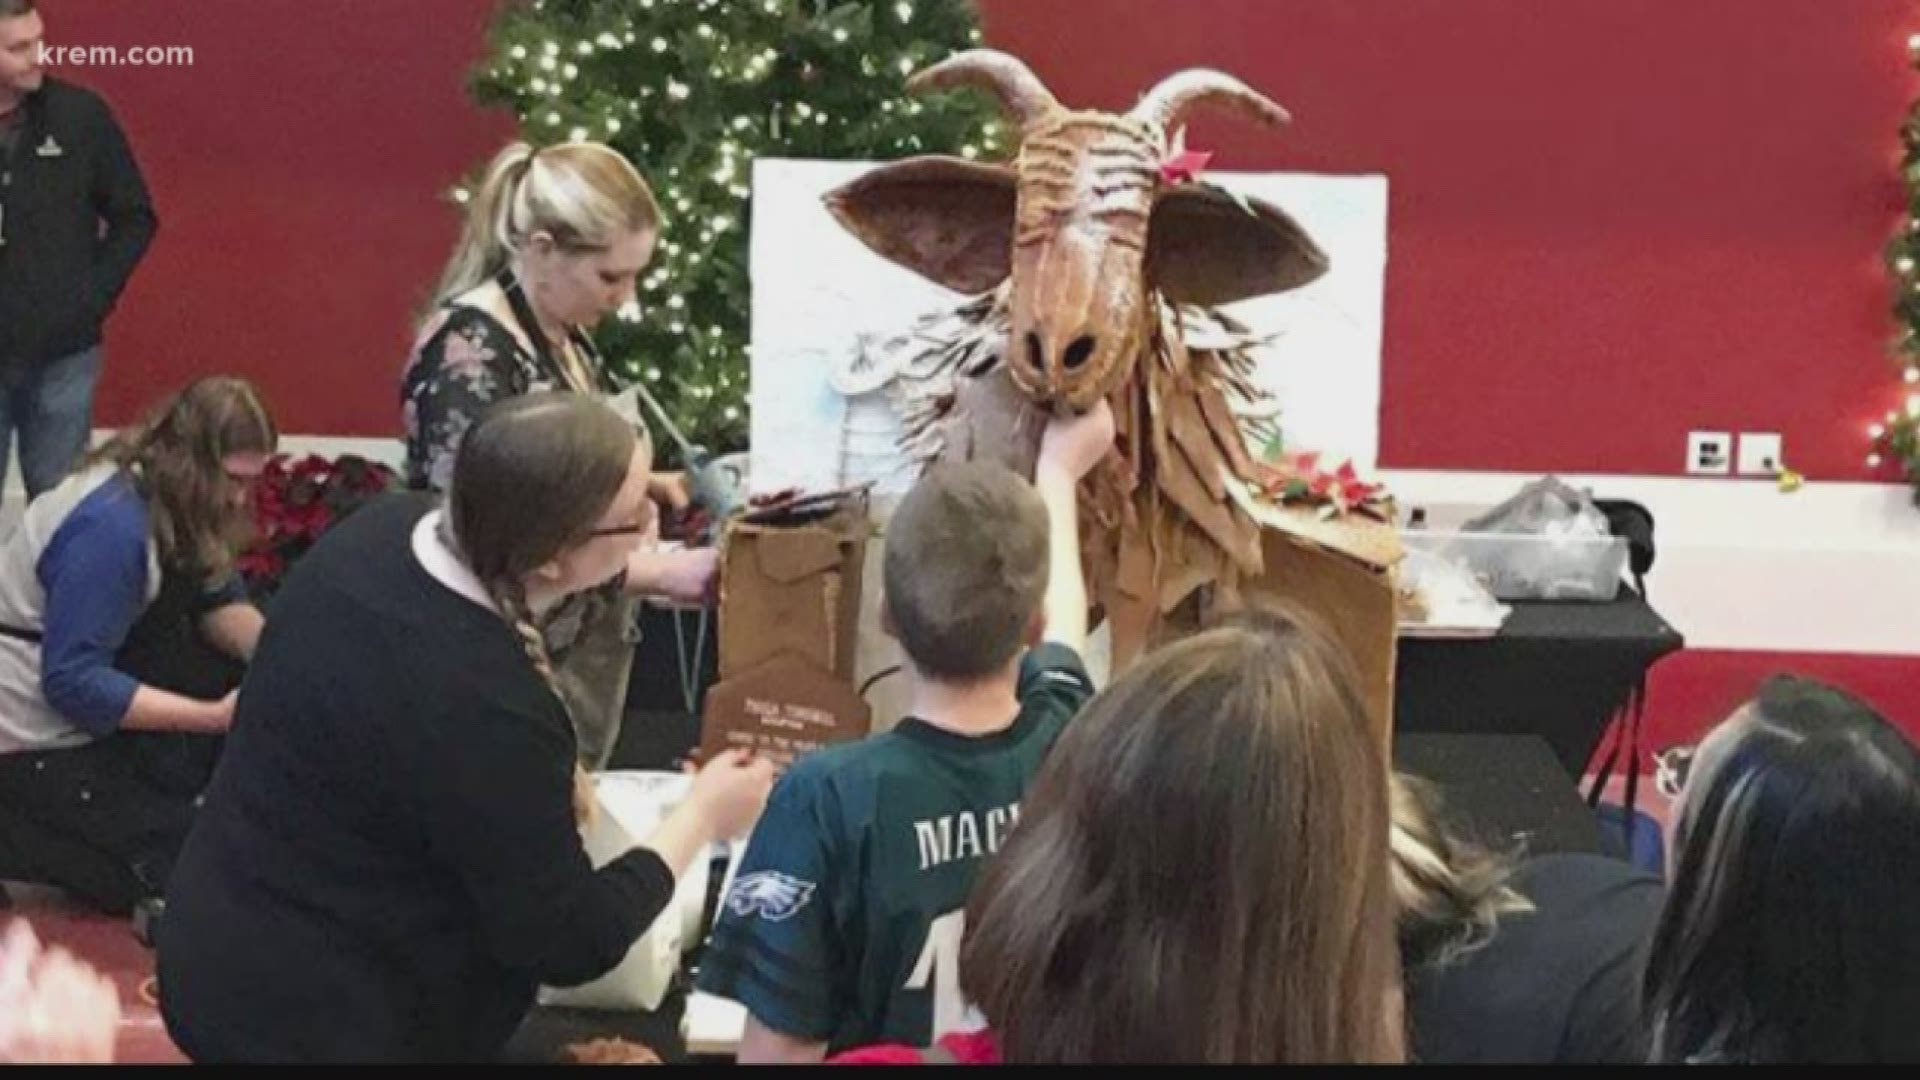 An award-winning gingerbread garbage goat with the same functions as the Riverfront Park sculpture will be on display throughout the holiday season at the Davenport Grand Hotel.